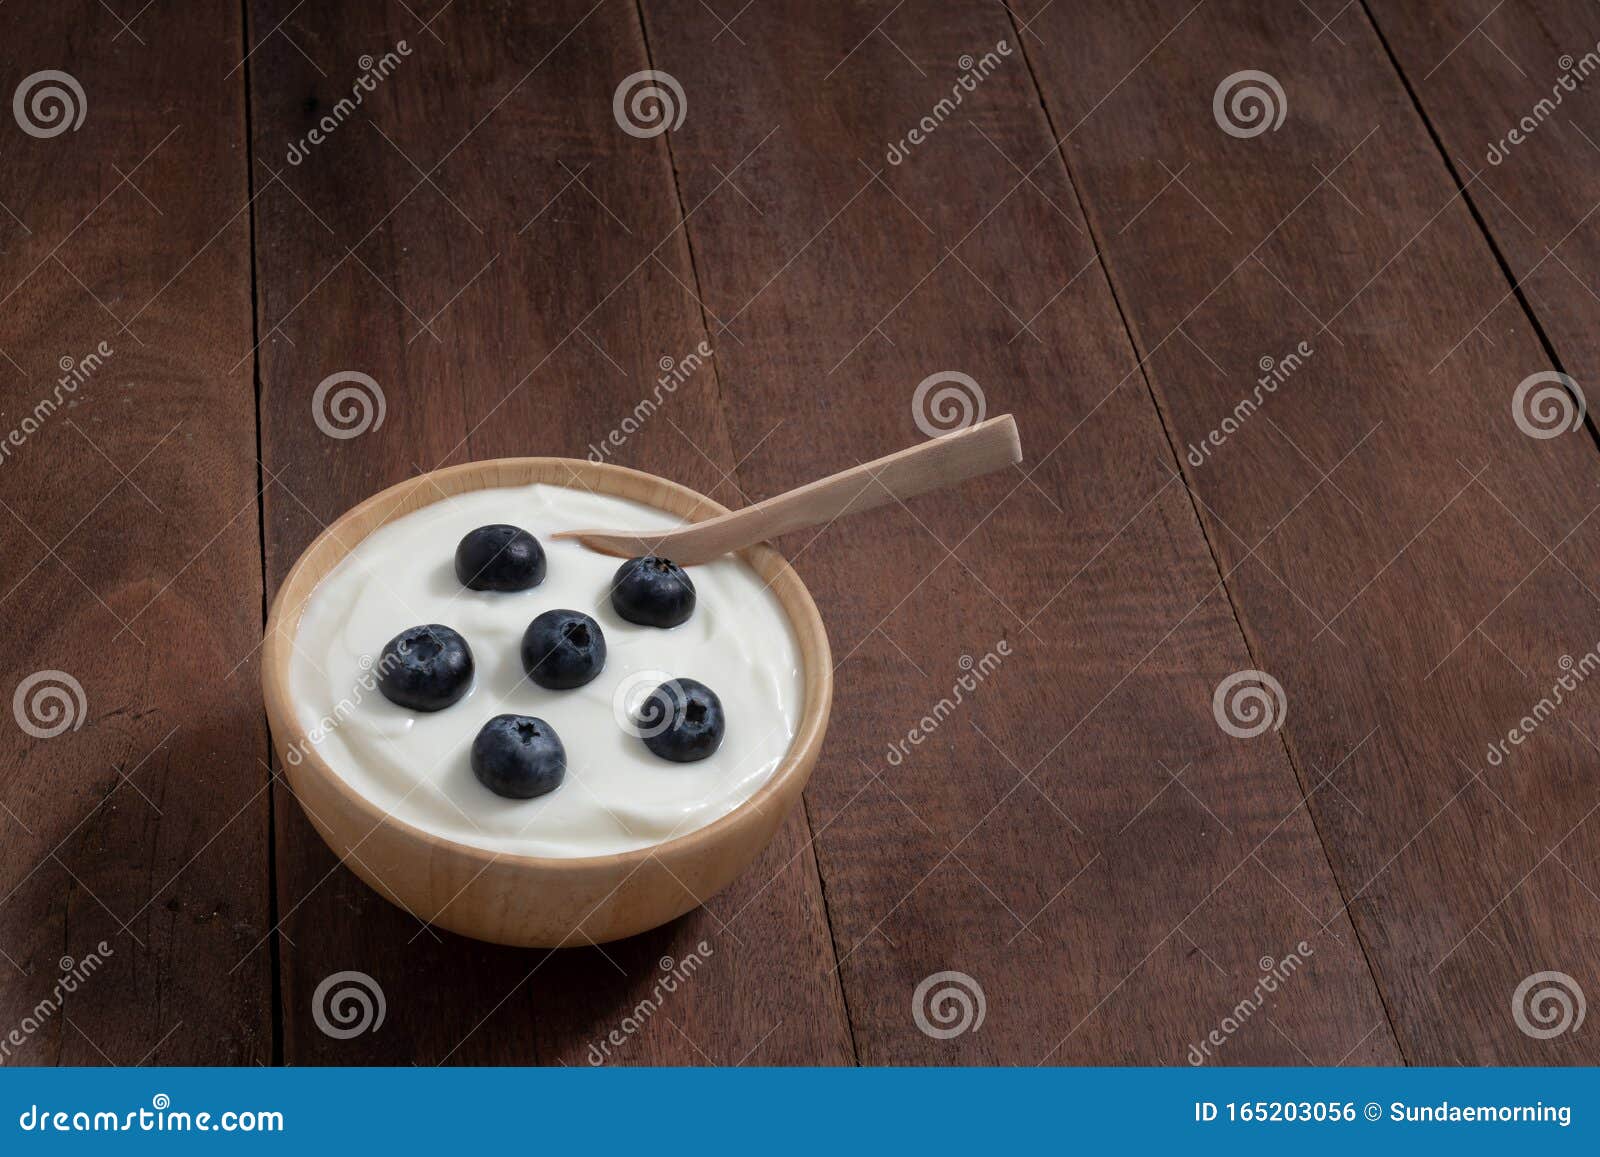 natural homemade plain organic yogurt mixed with fresh blueberry fruit in white bowl on wood texture background